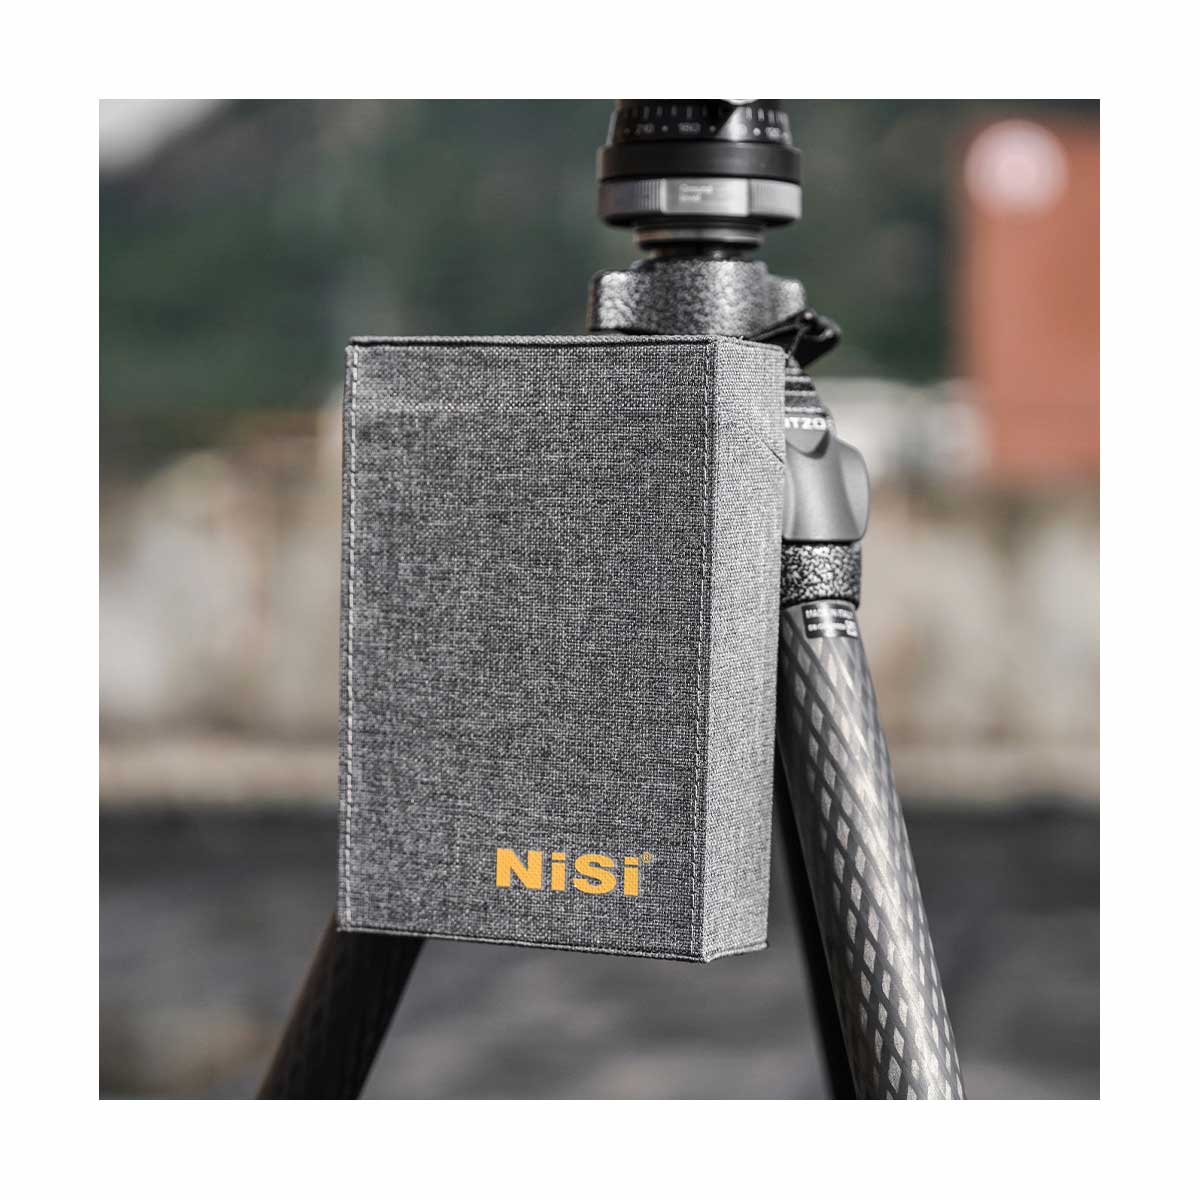 NiSi Hard Case for 8 Filters Generation III